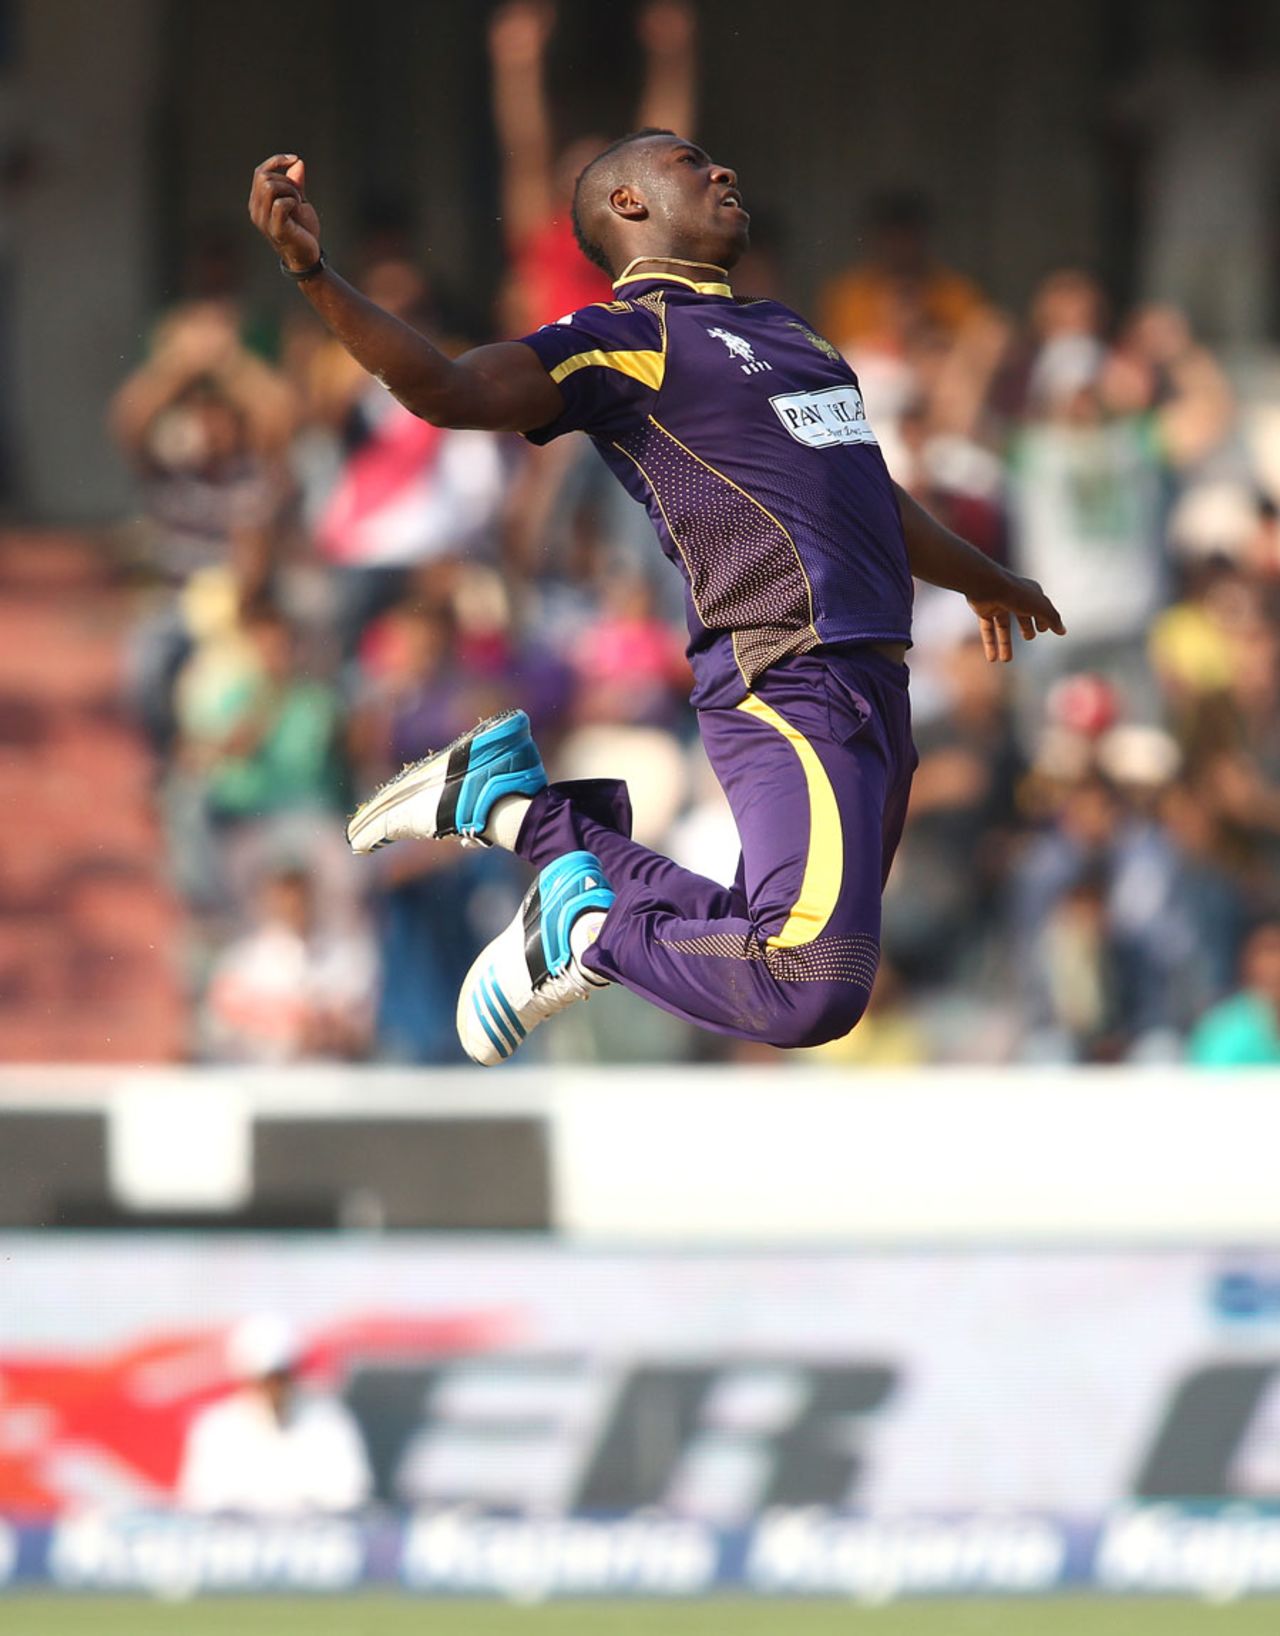 Andre Russell leaps in joy after a wicket, Kolkata Knight Riders v Hobart Hurricanes, 1st semi-final, CLT20, Hyderabad, October 2, 2014